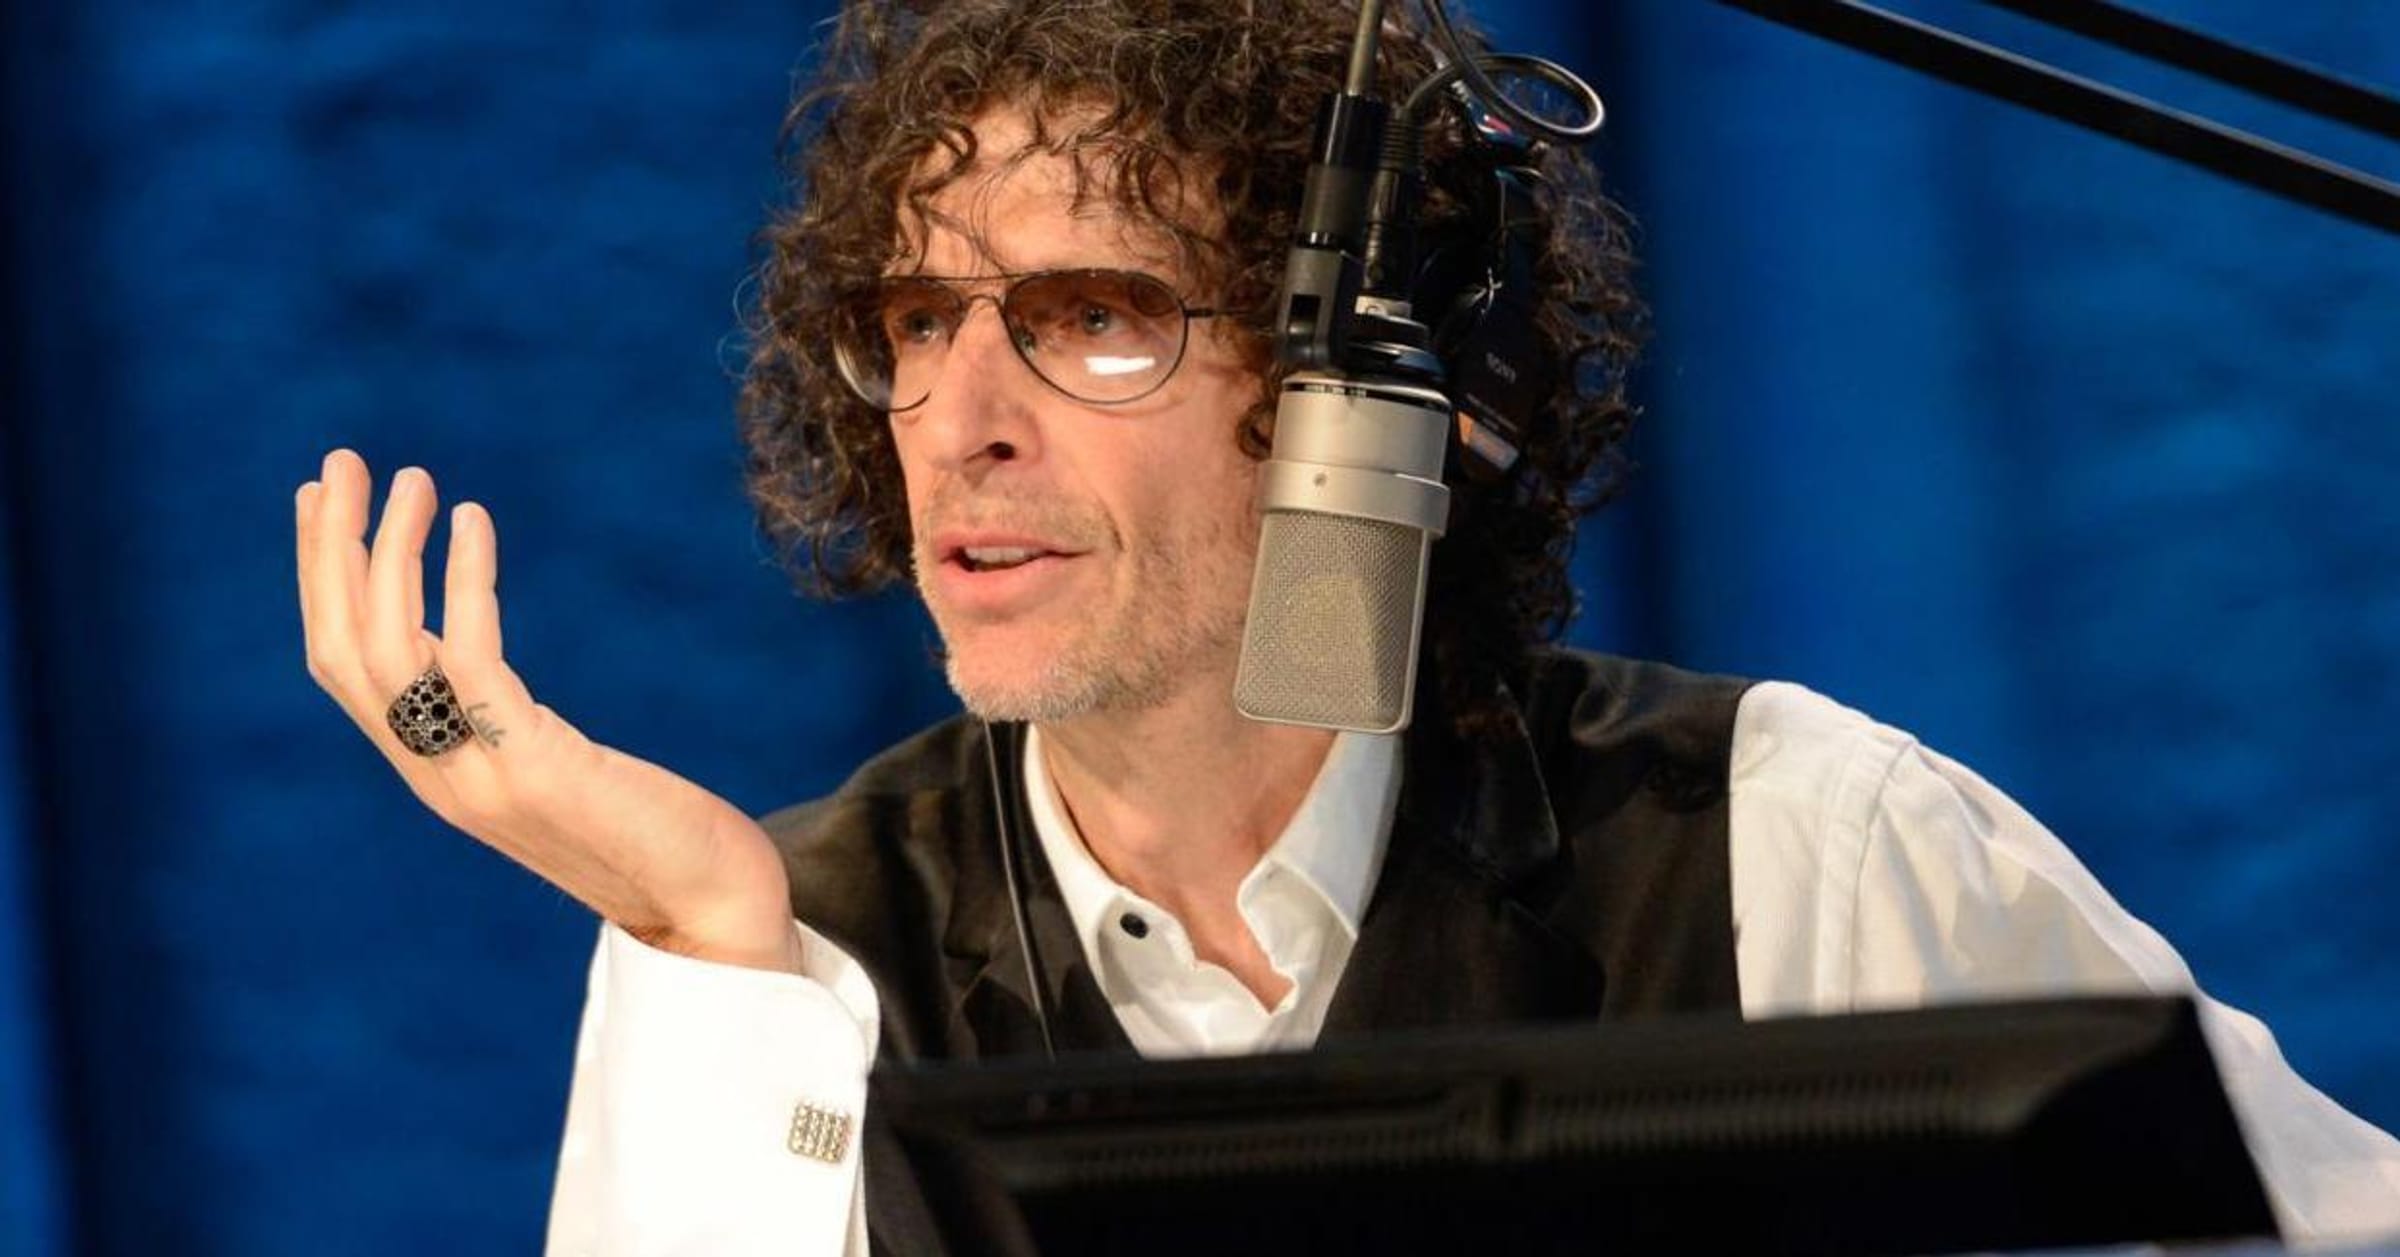 Best Howard Stern Interviews List of Top Stern Show Guests